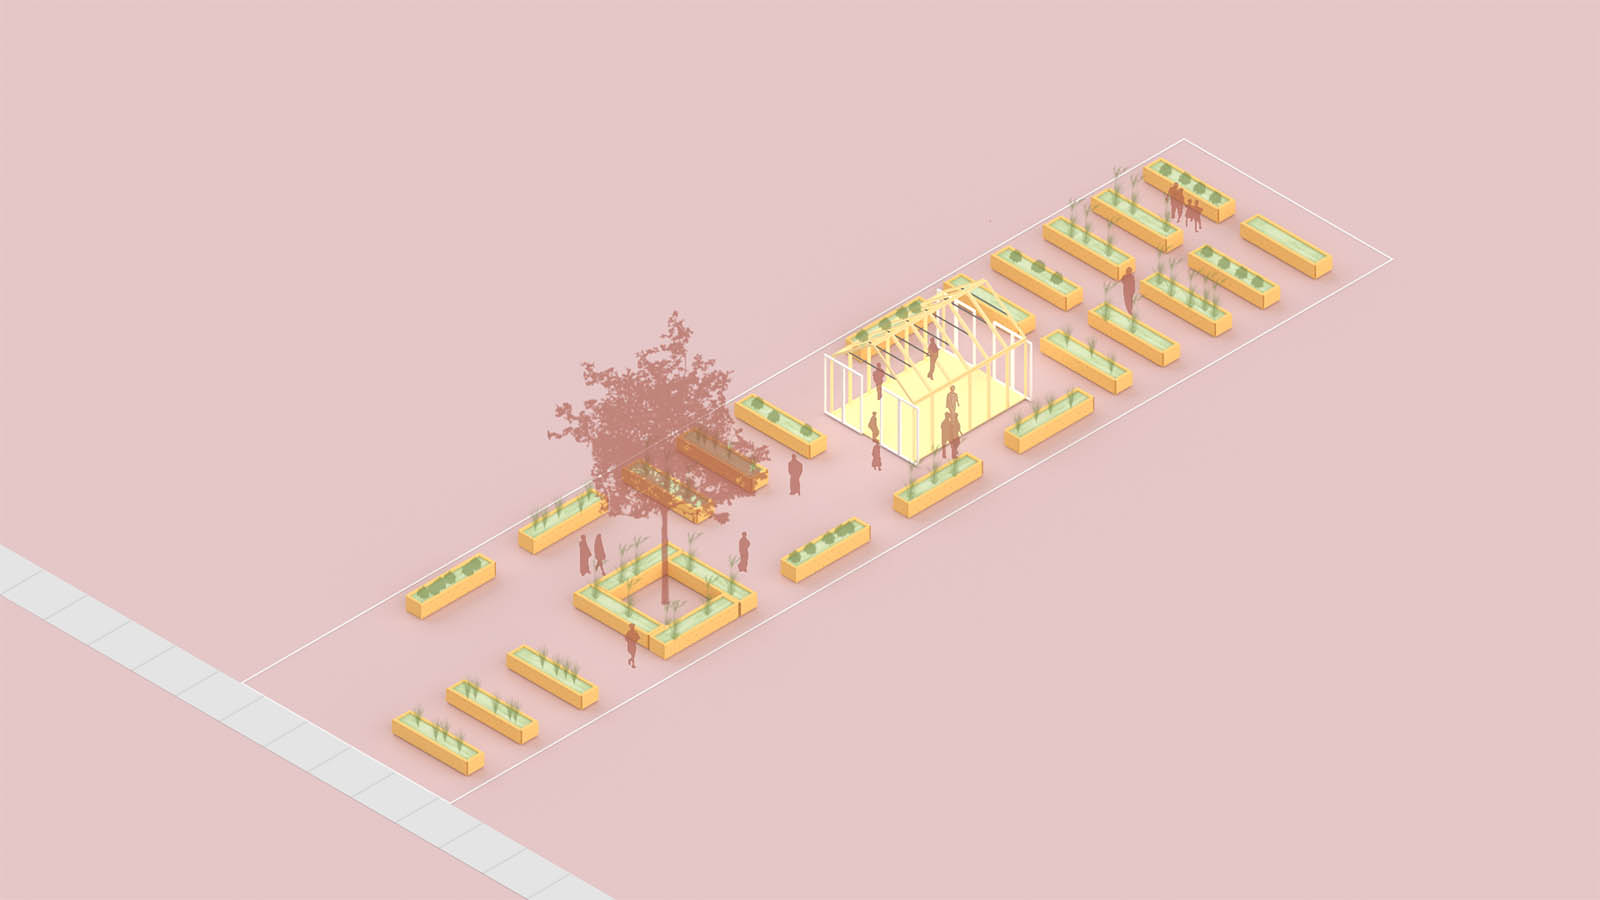 Render of Casita with a tree and a building in the middle and planters scattered around the building and the tree